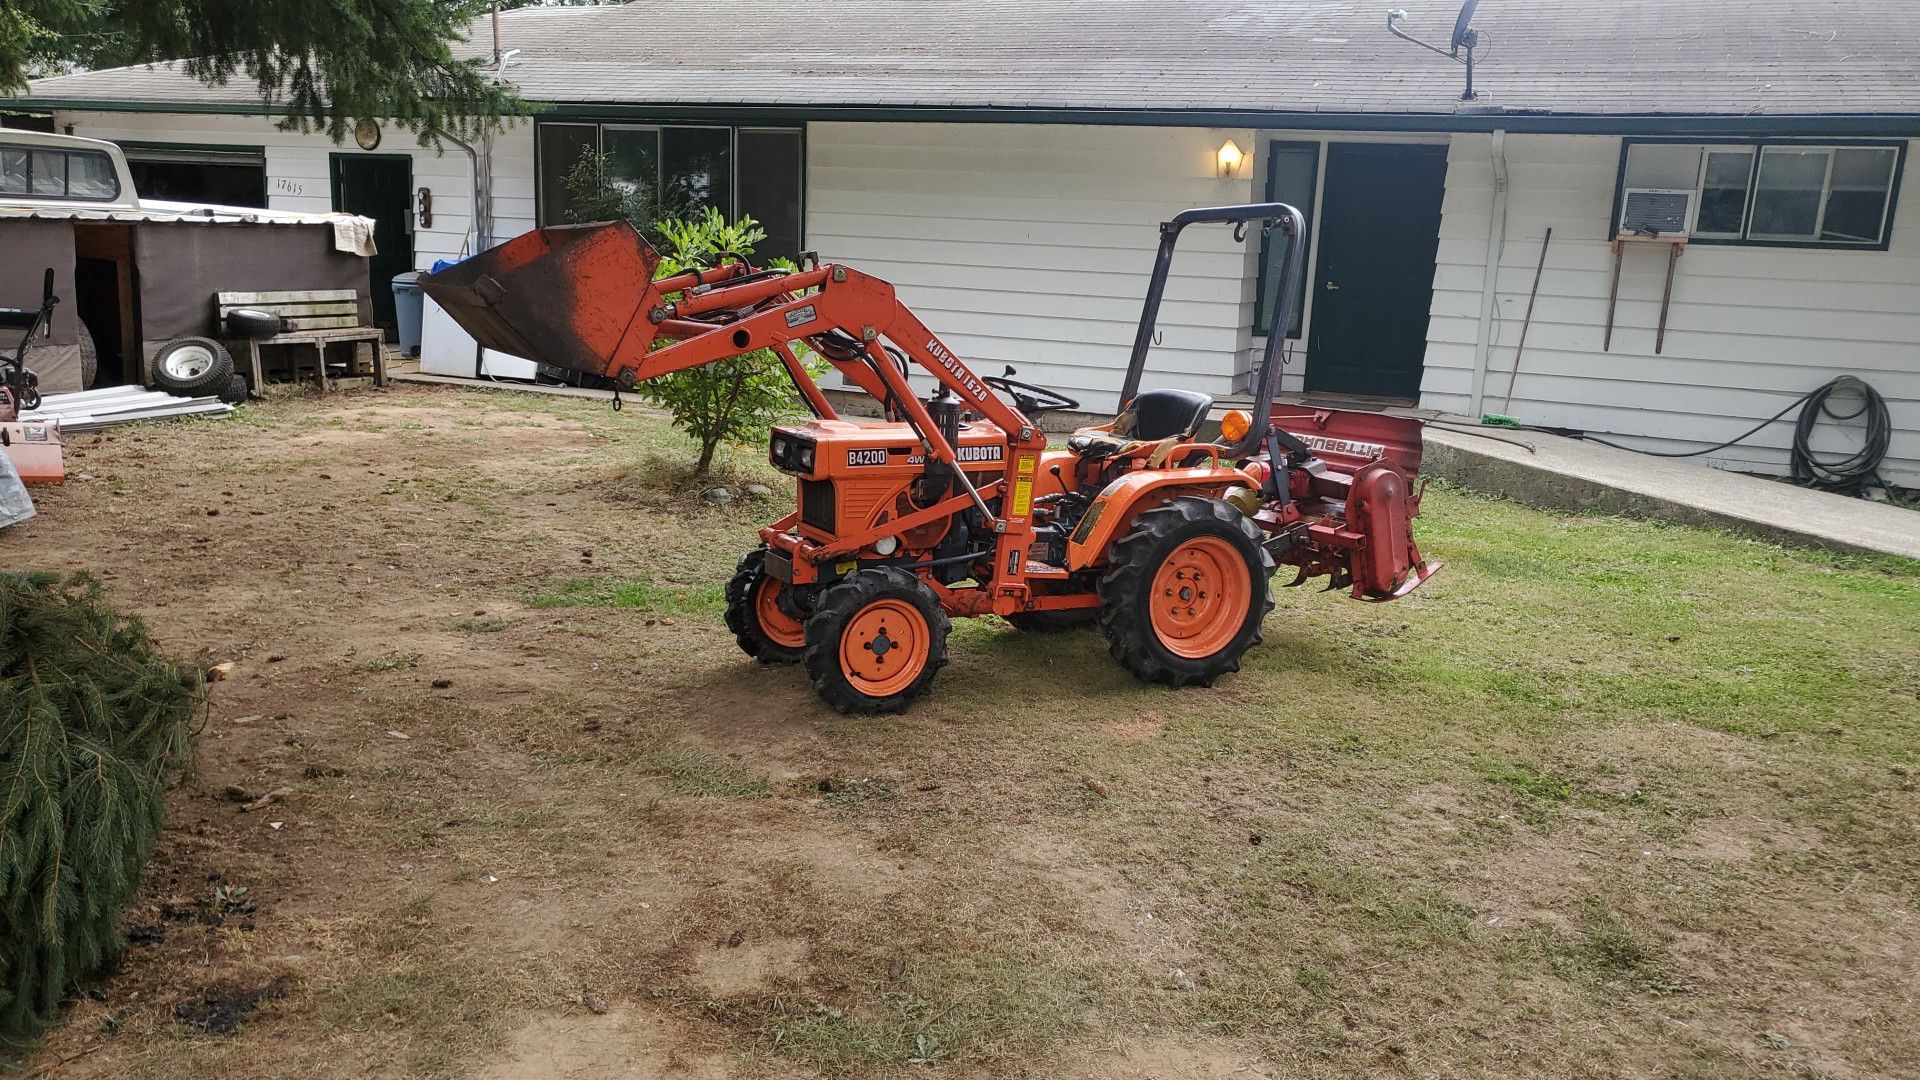 kubota tractor B4200 4wd diesel tractor. Runs and operates great only 1550hrs